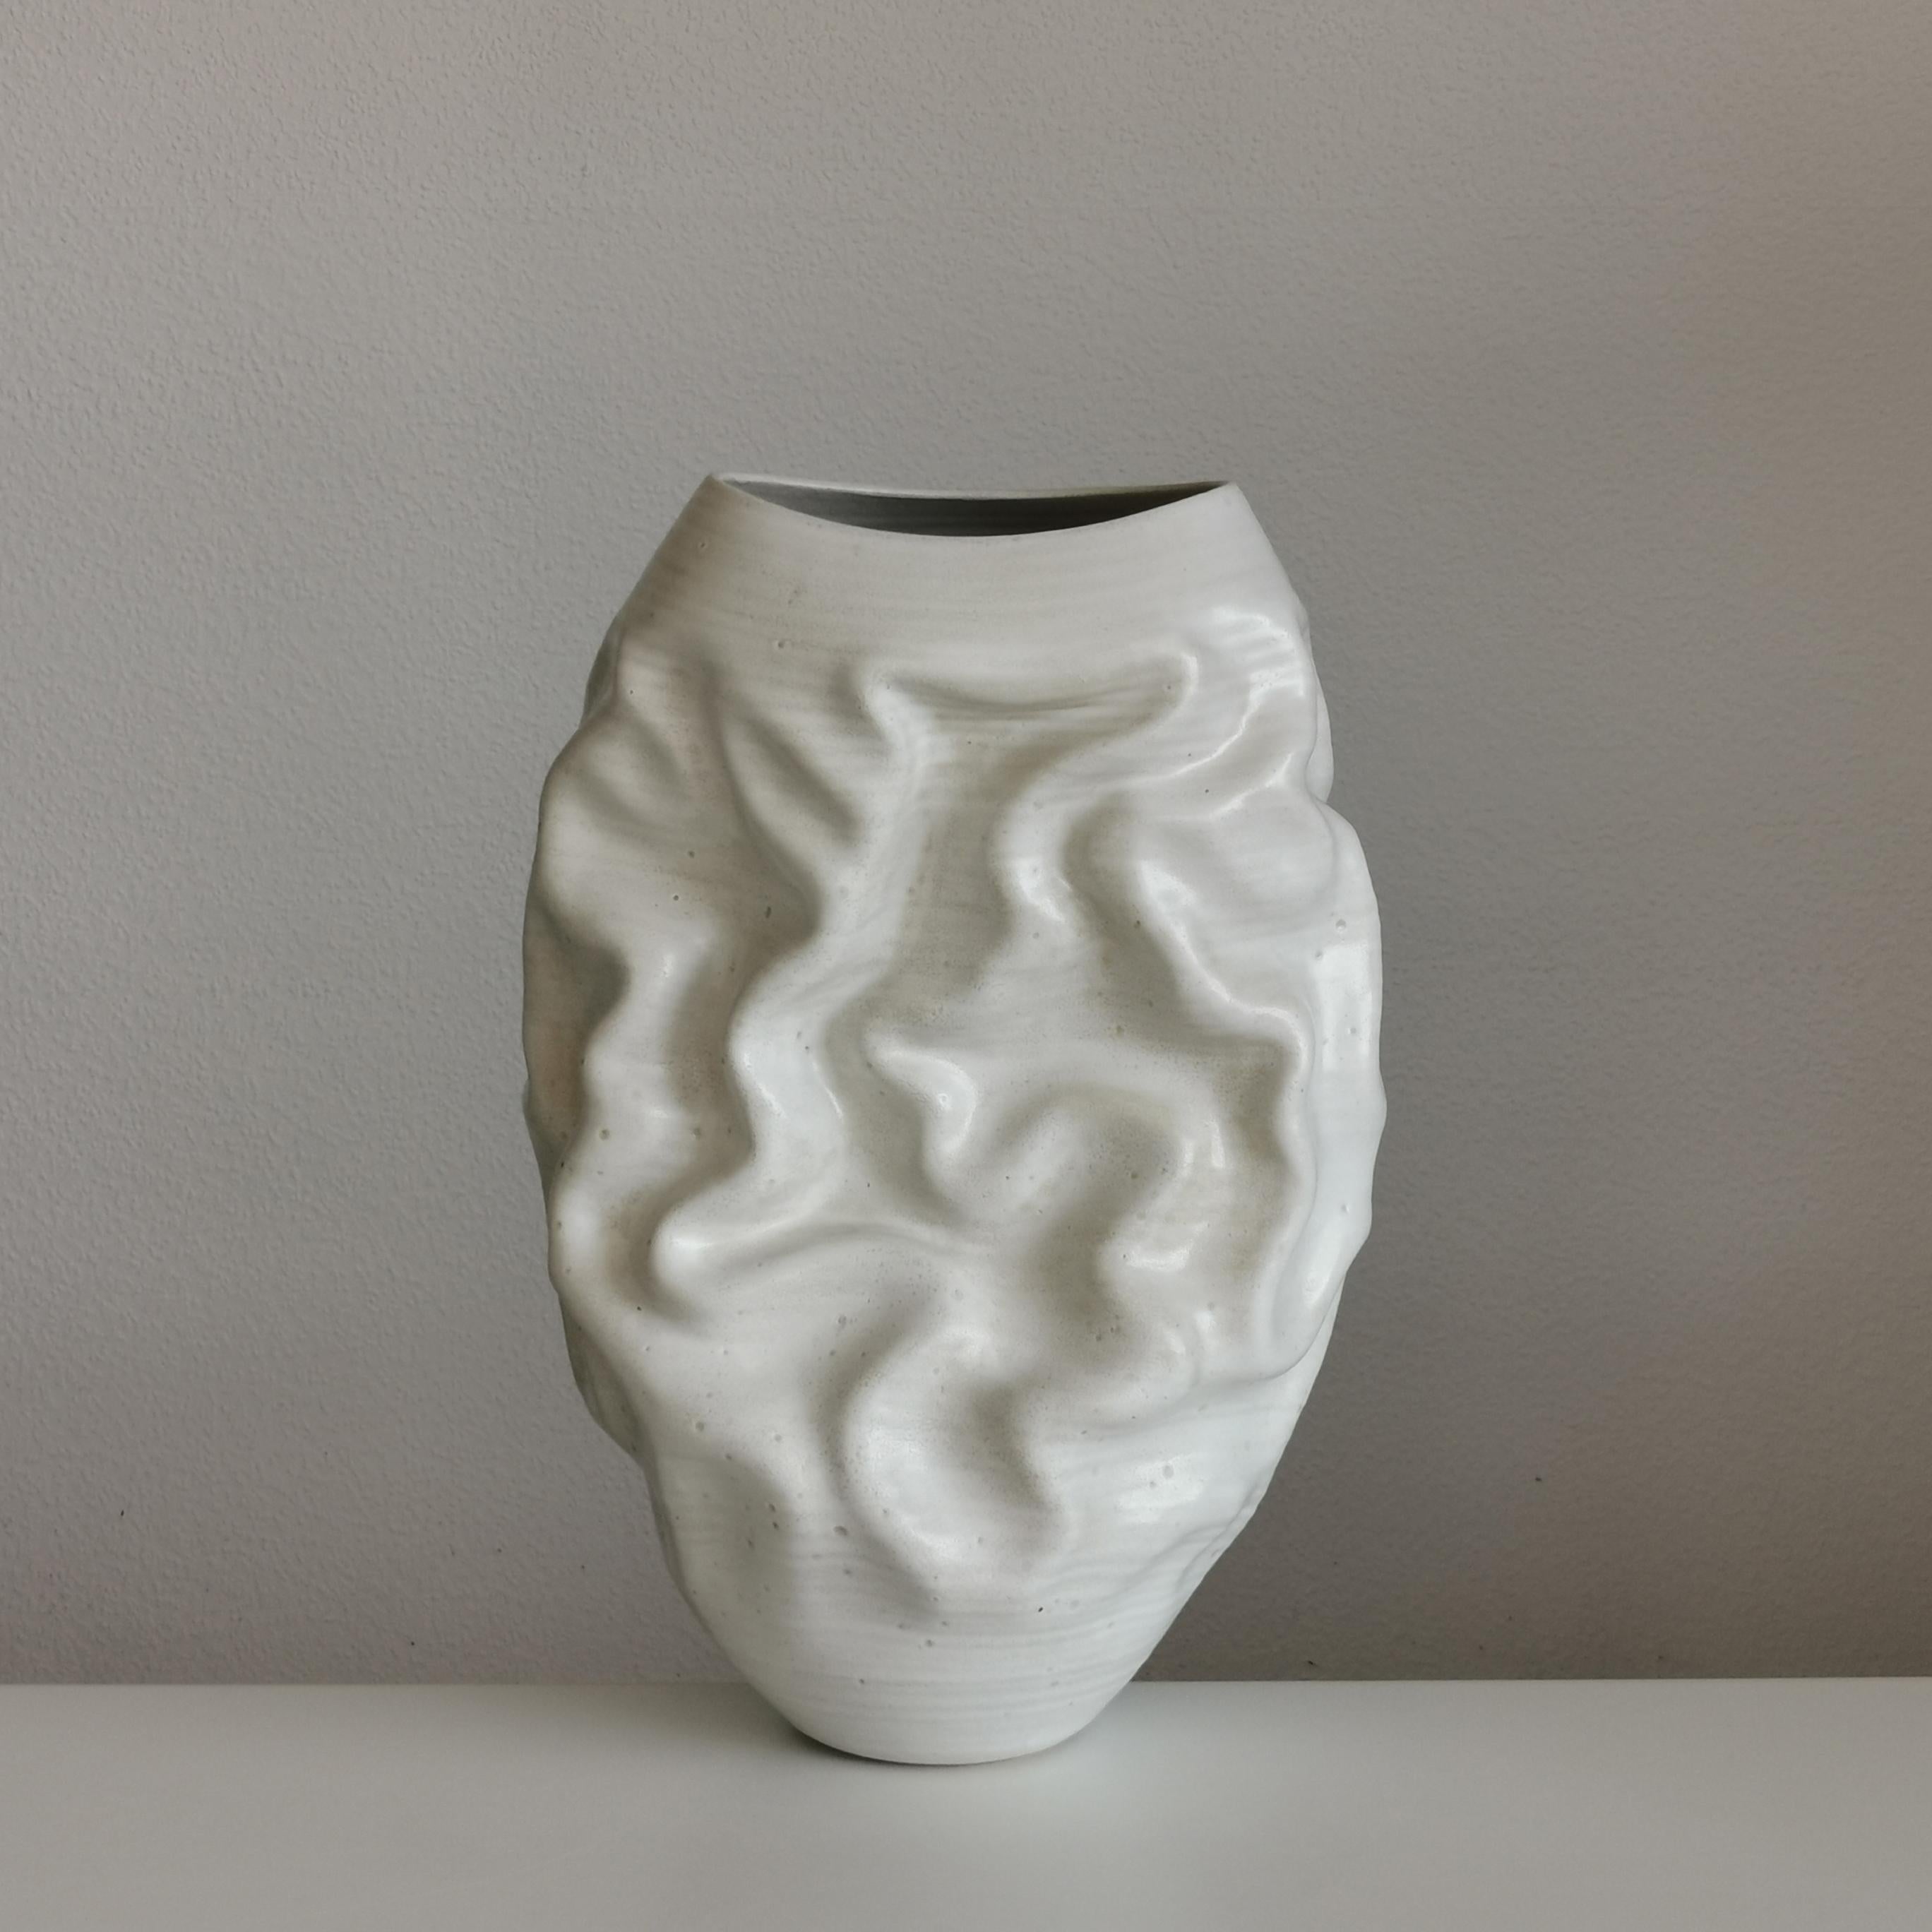 Vessel No. 126 white dehydrated form vessel from ceramic artist Nicholas Arroyave-Portela.

White St.Thomas clay, stoneware glazes, multi fired to cone 6 (1223 degrees) Made in 2023

45 cm tall, 28 cm wide, 20 cm deep

(Vessel, Interior sculpture,